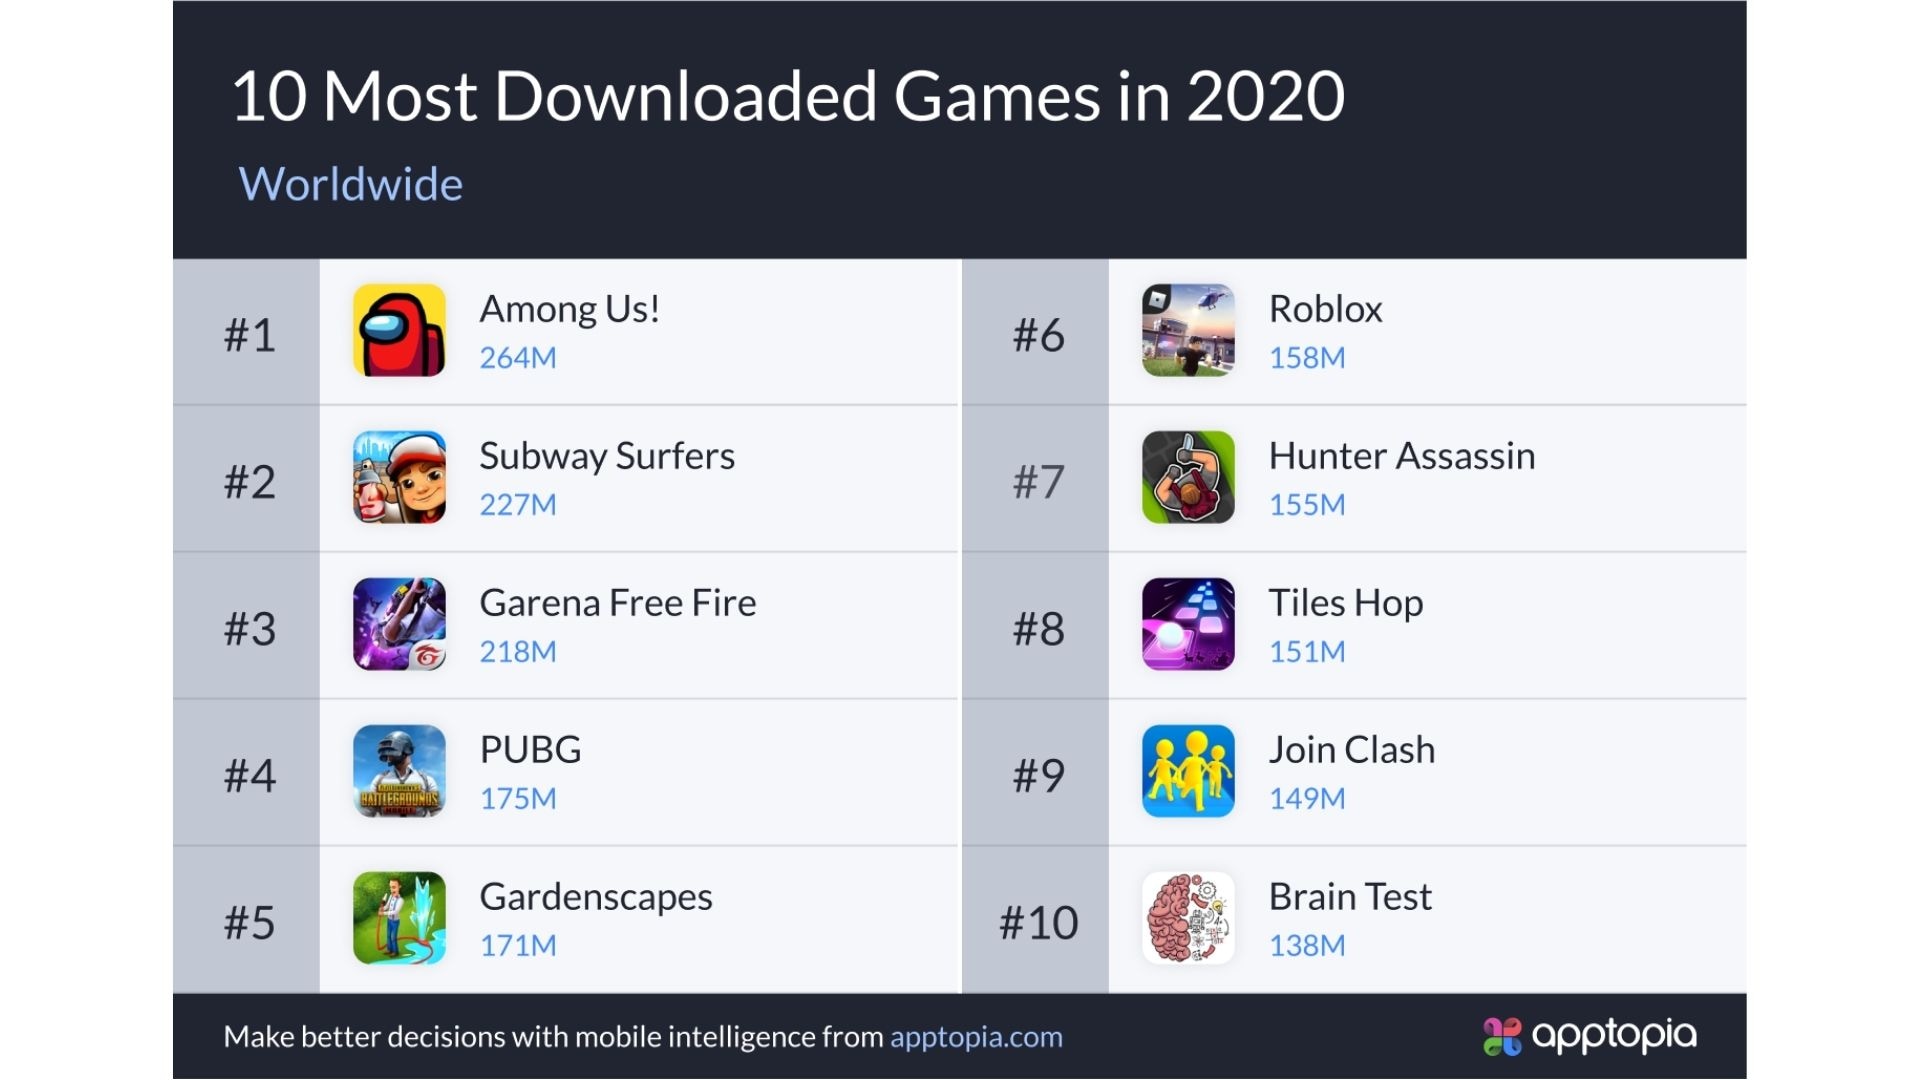 Among Us was most downloaded mobile game in 2020 - The Hindu